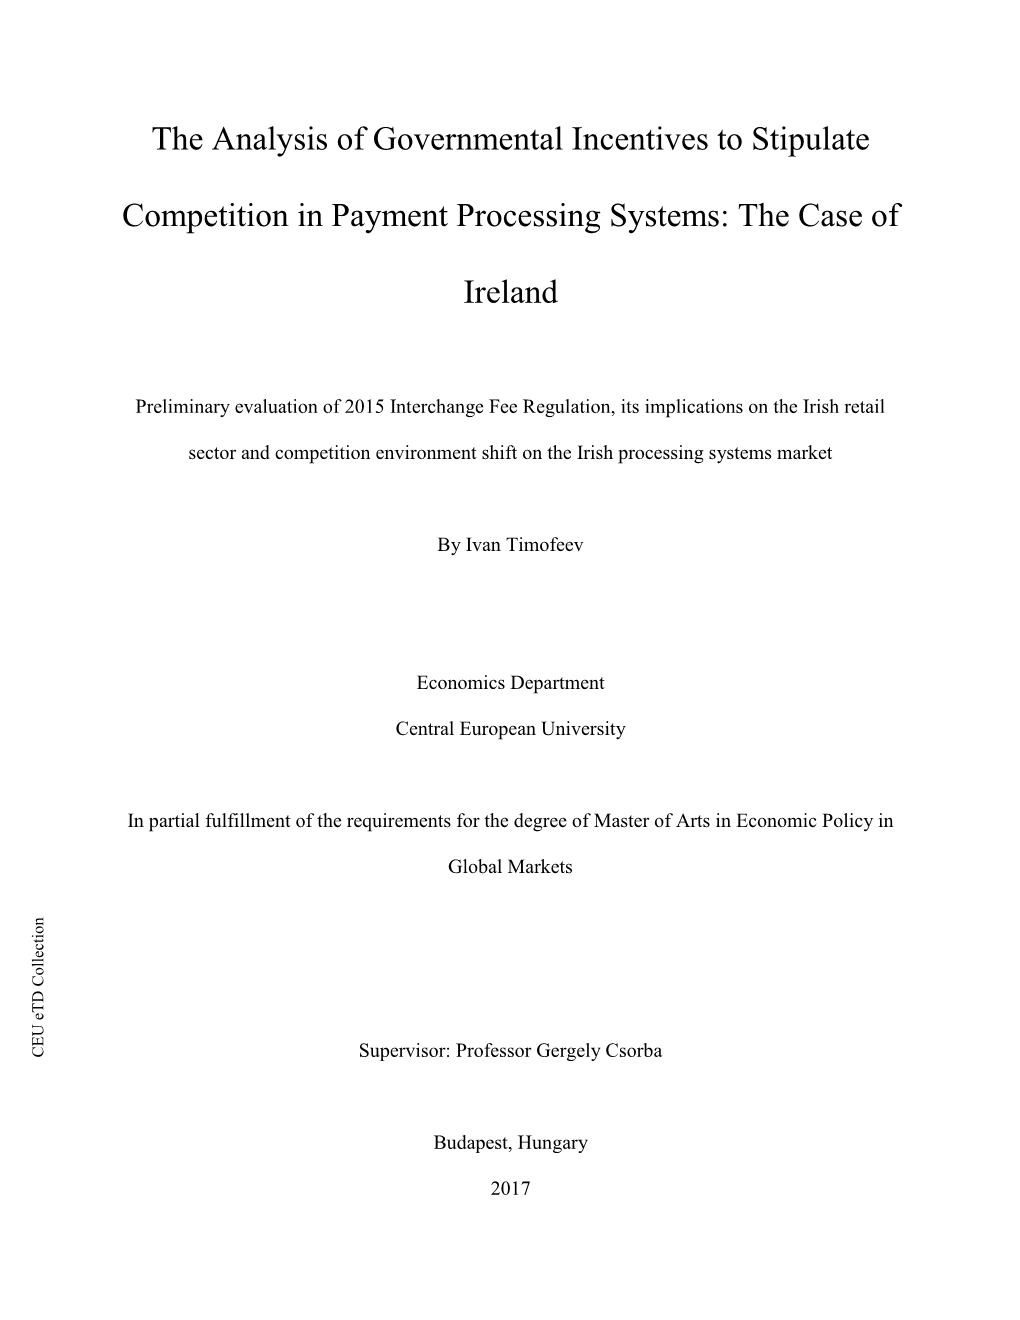 The Analysis of Governmental Incentives to Stipulate Competition